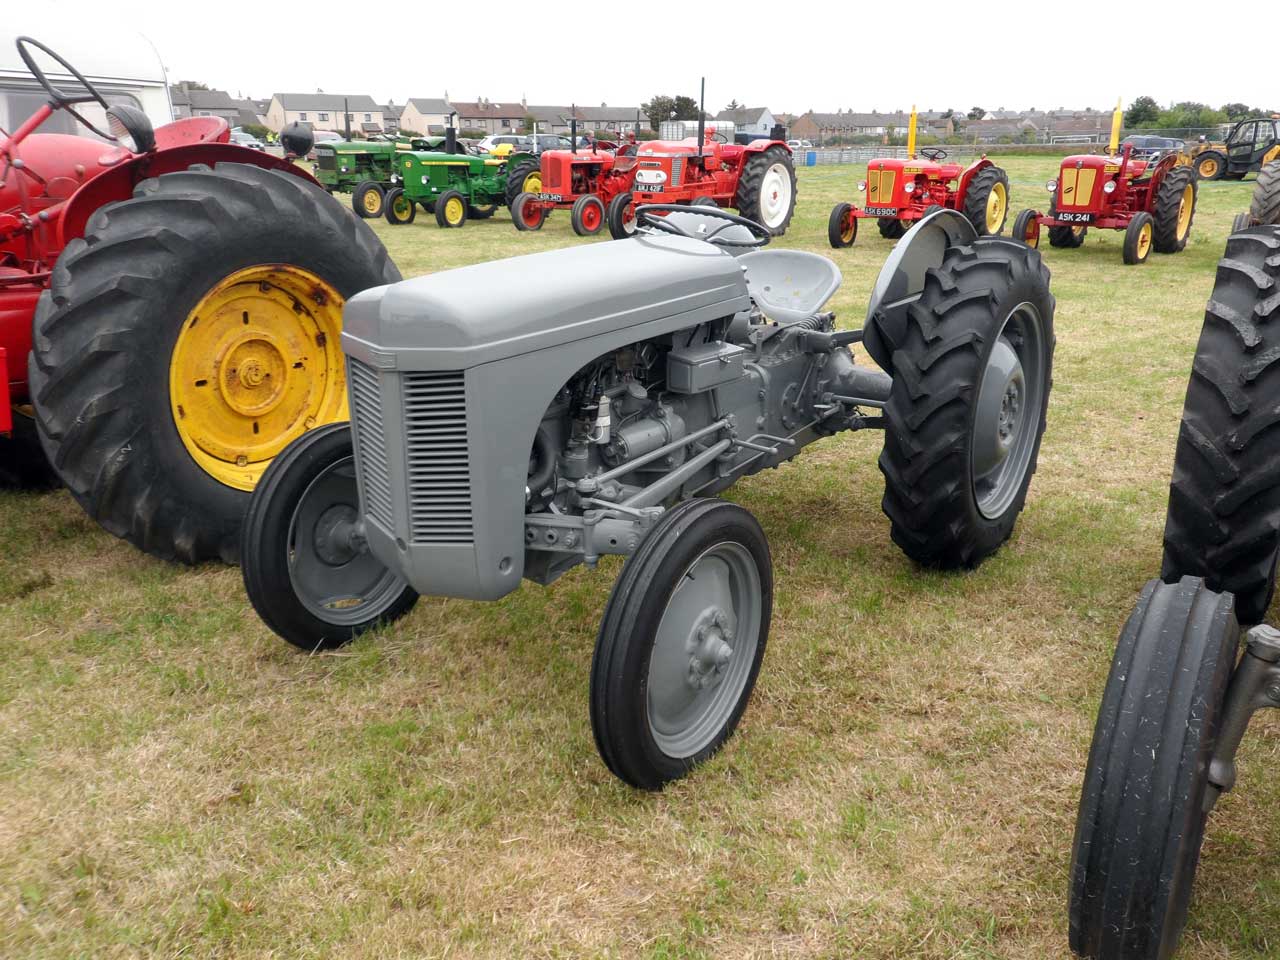 Photo: Vintage Farm Vehicles At Caithness County Show 2018